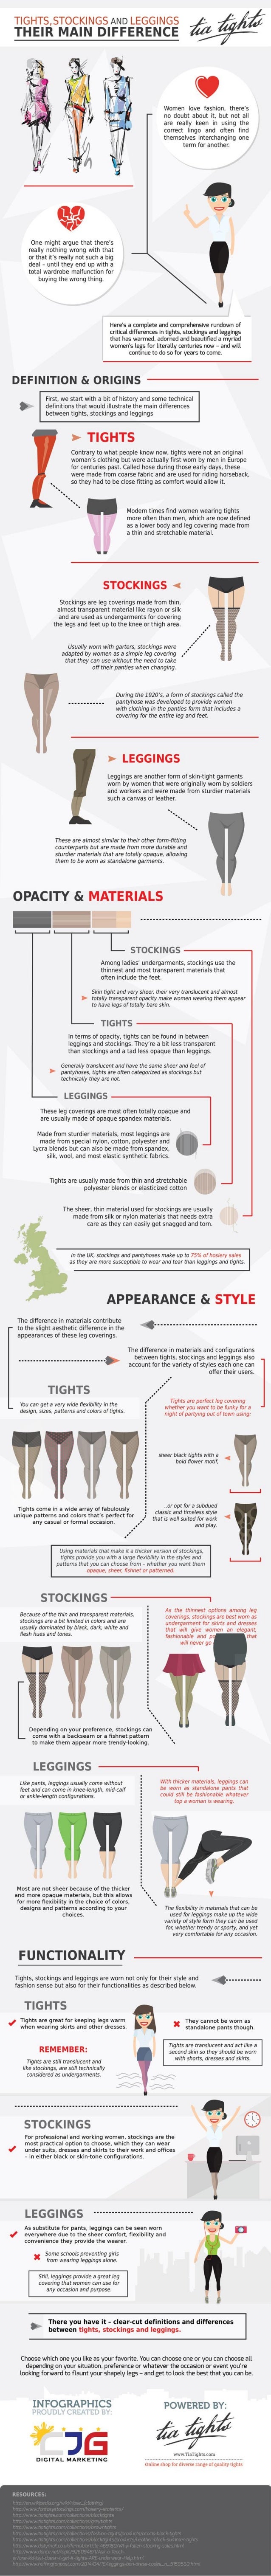 Tights, Stockings and Leggings - Their Main Difference (Infographic)